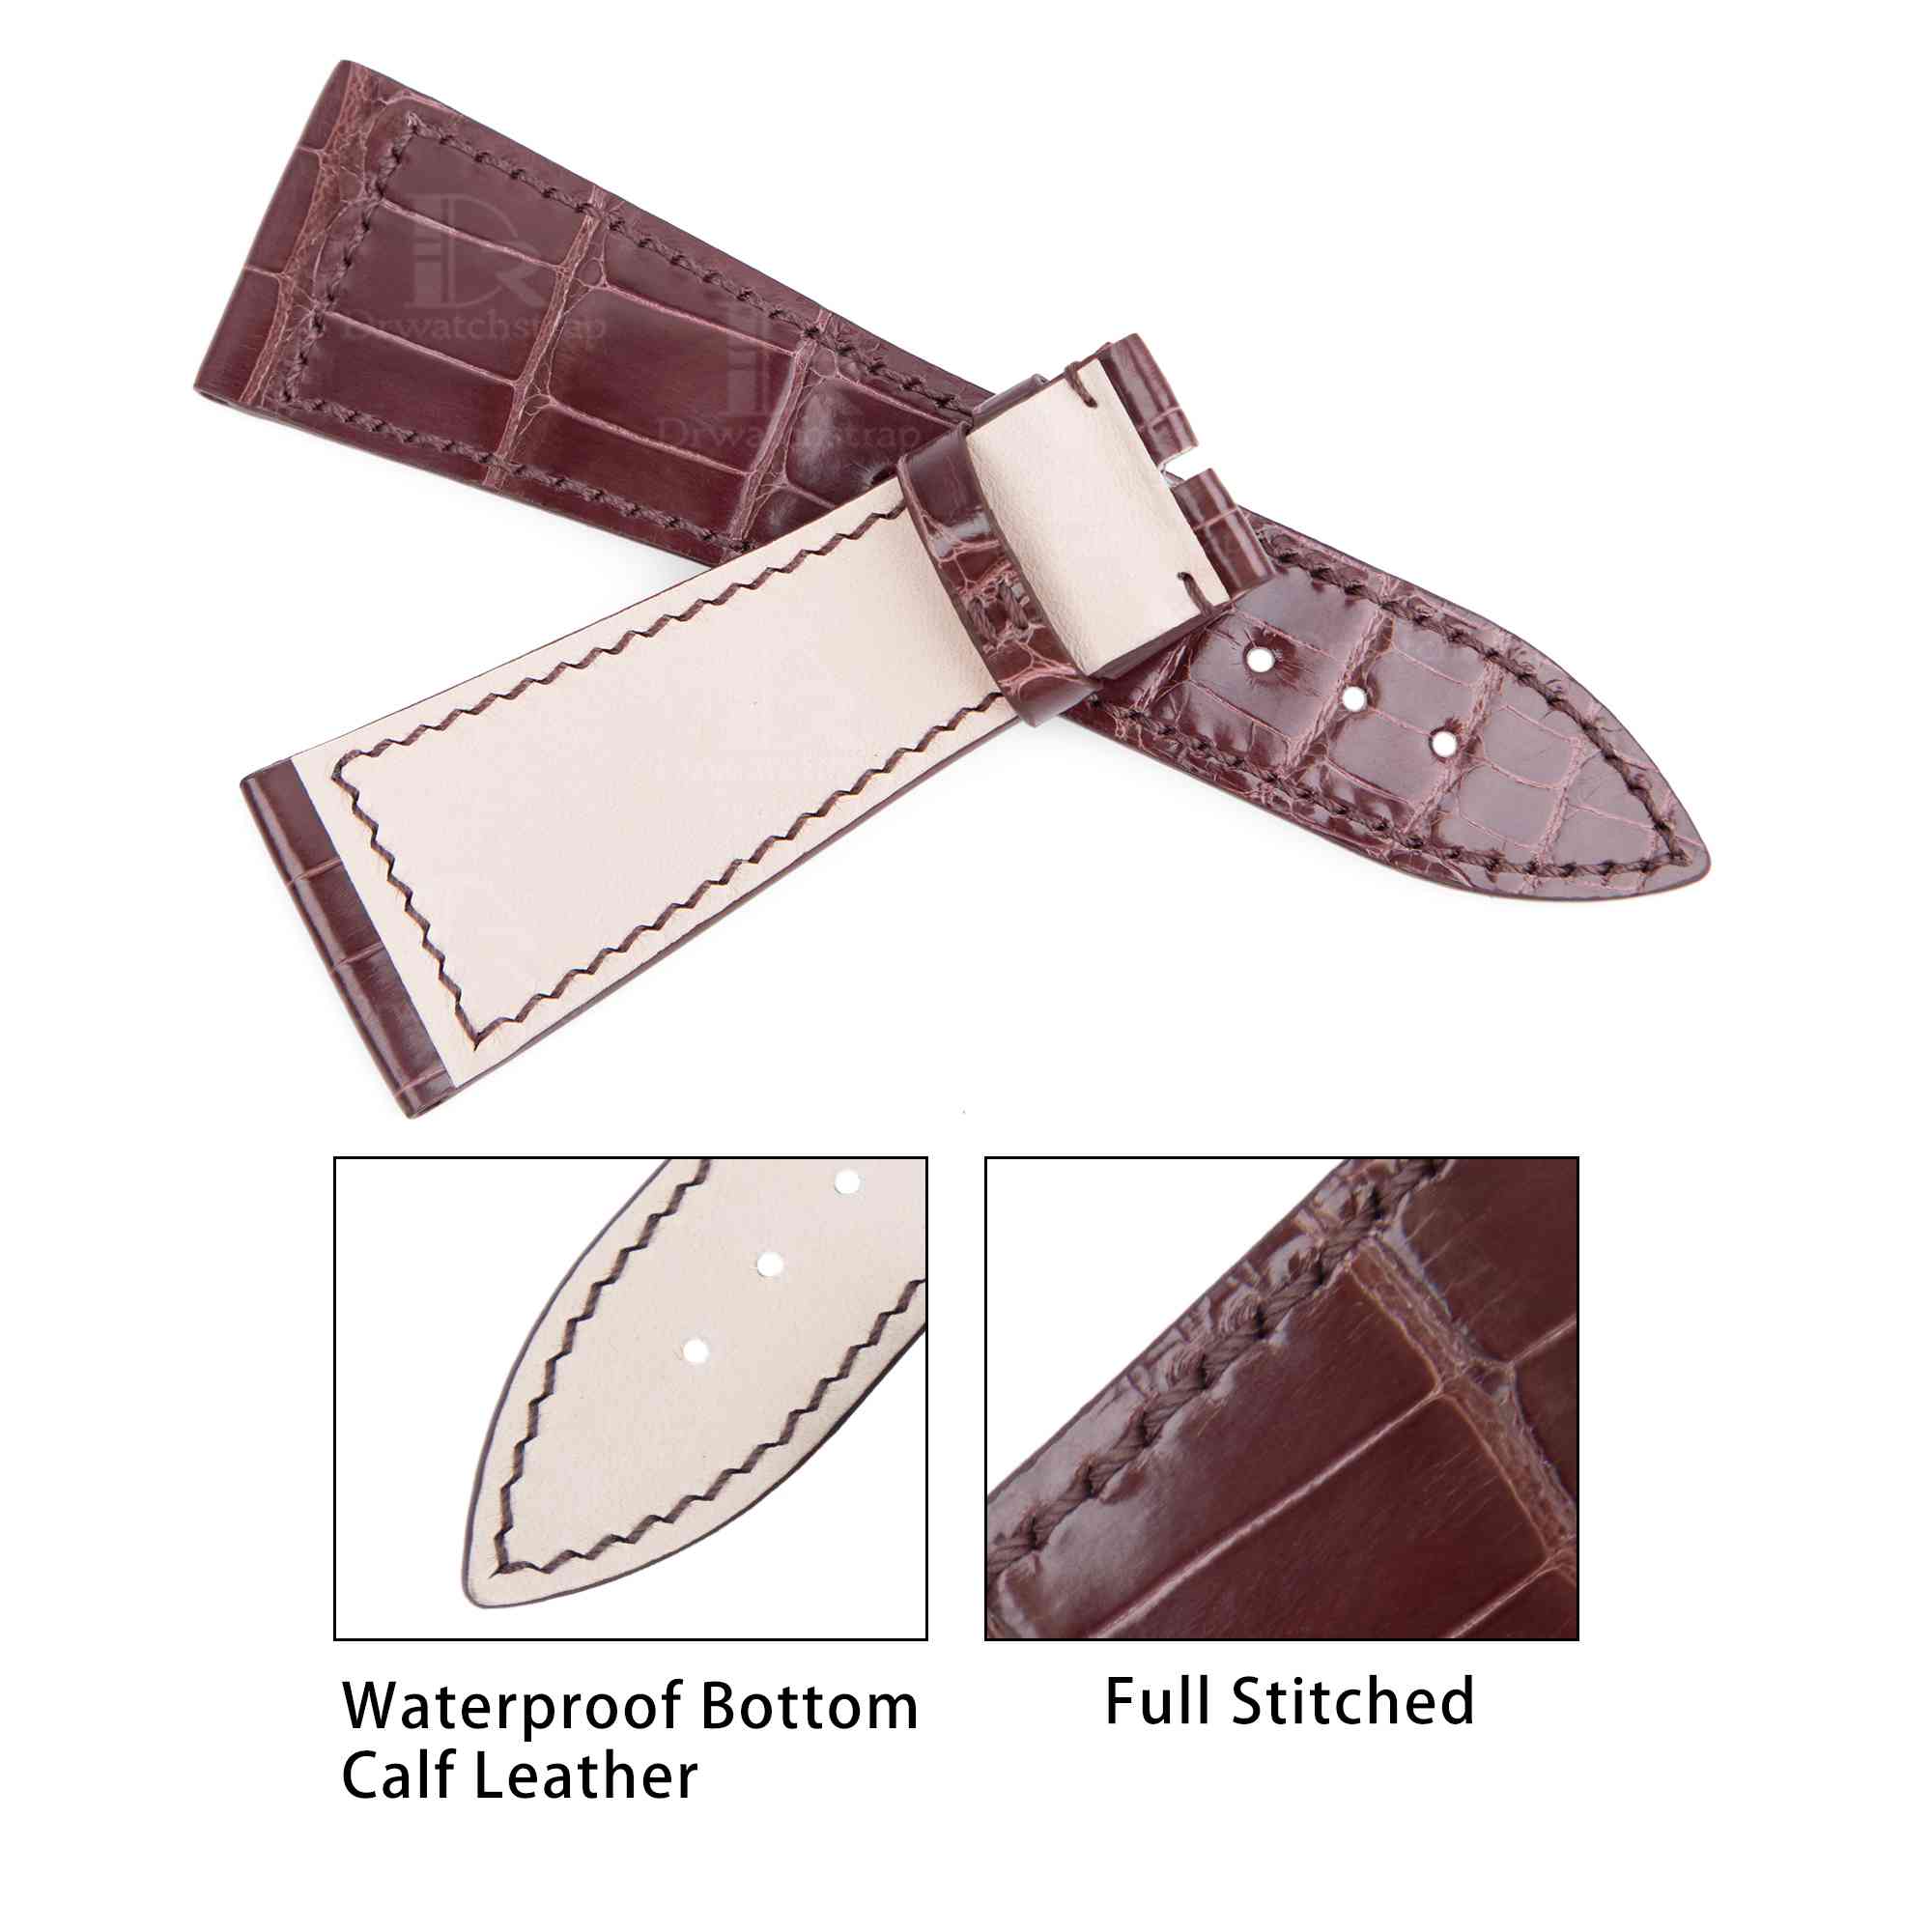 Custom handmade best quality grade A American crocodile 26mm Brown leather alligator strap and watch band replacement fit for Franck Muller Master Square 6000 h SC DT luxury watches online - High-end leather straps for sale